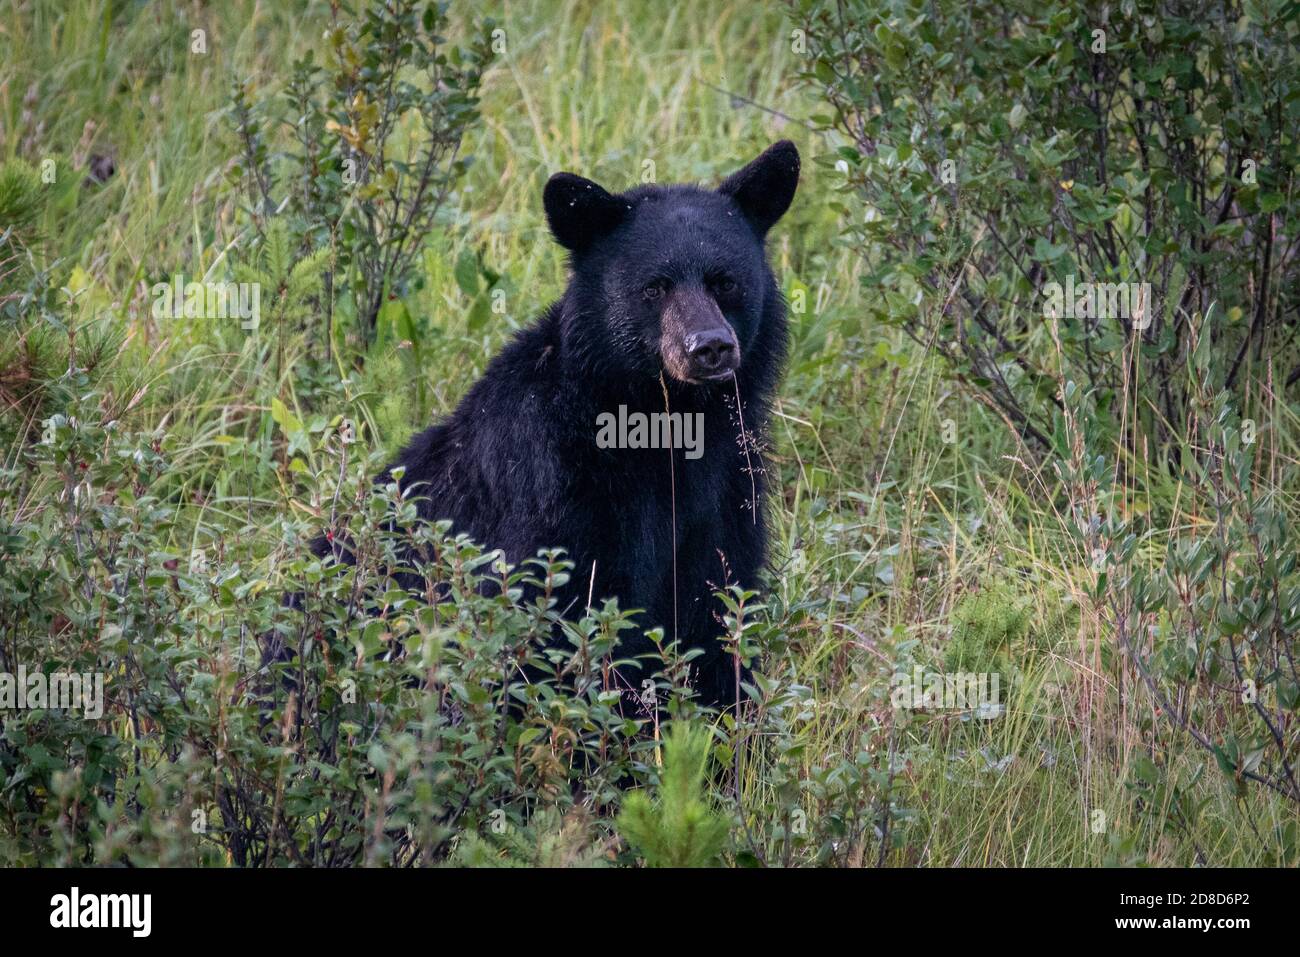 A black bear foraging for food in Canada. Stock Photo